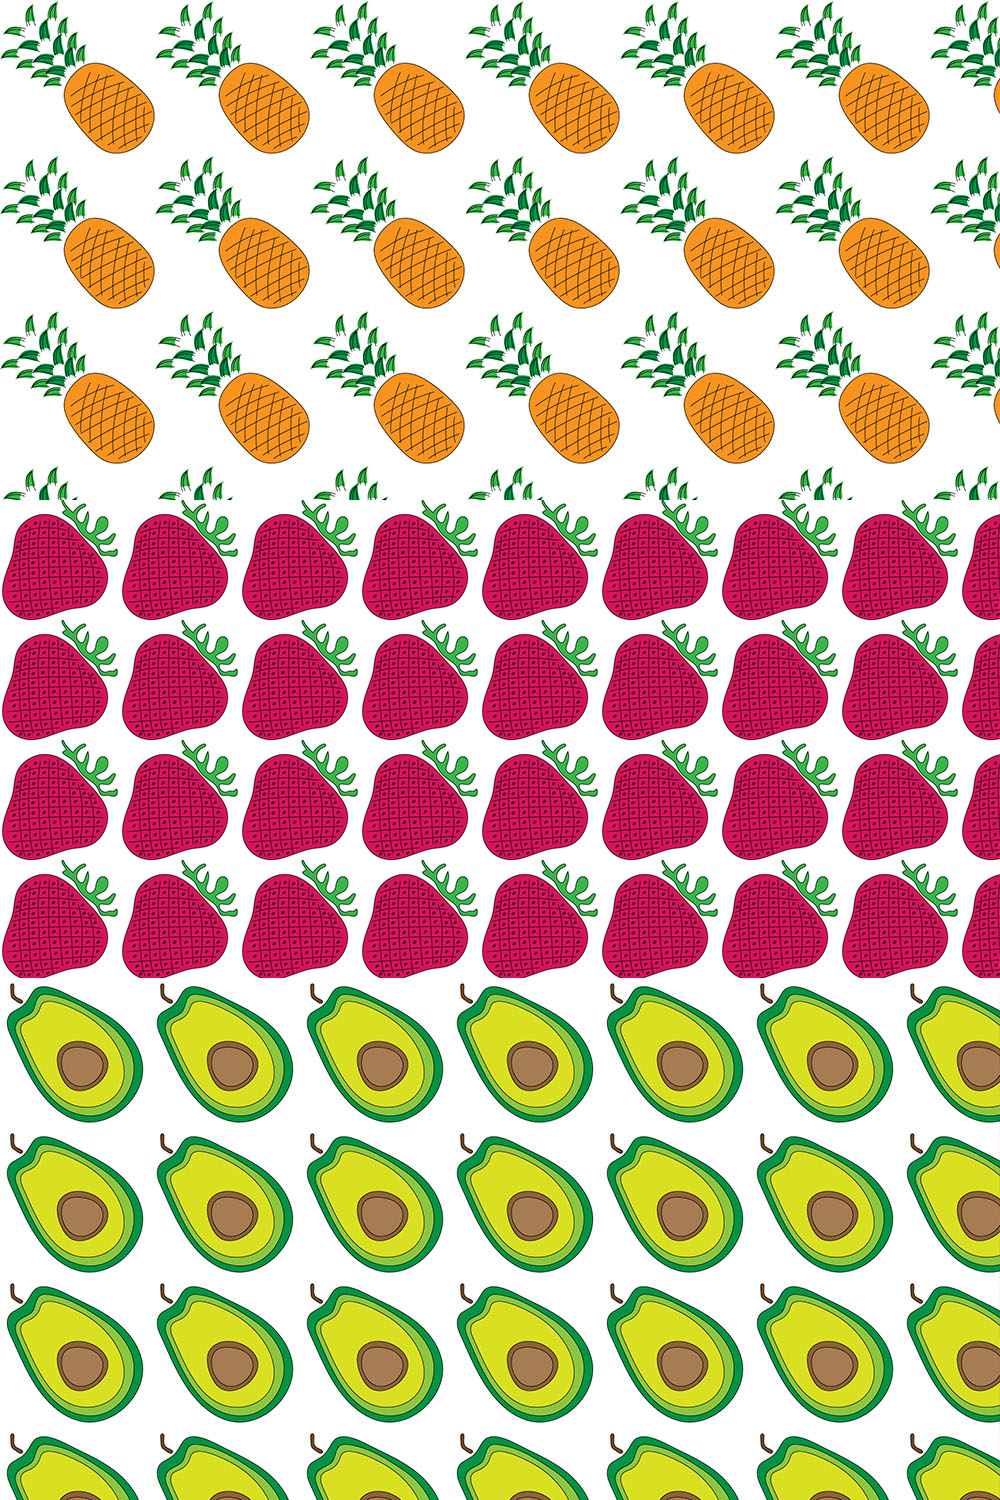 3 seamless fruit vector pattern pineapple strawberry avocado with fully editable ai file for print web and product design purpose pinterest preview image.